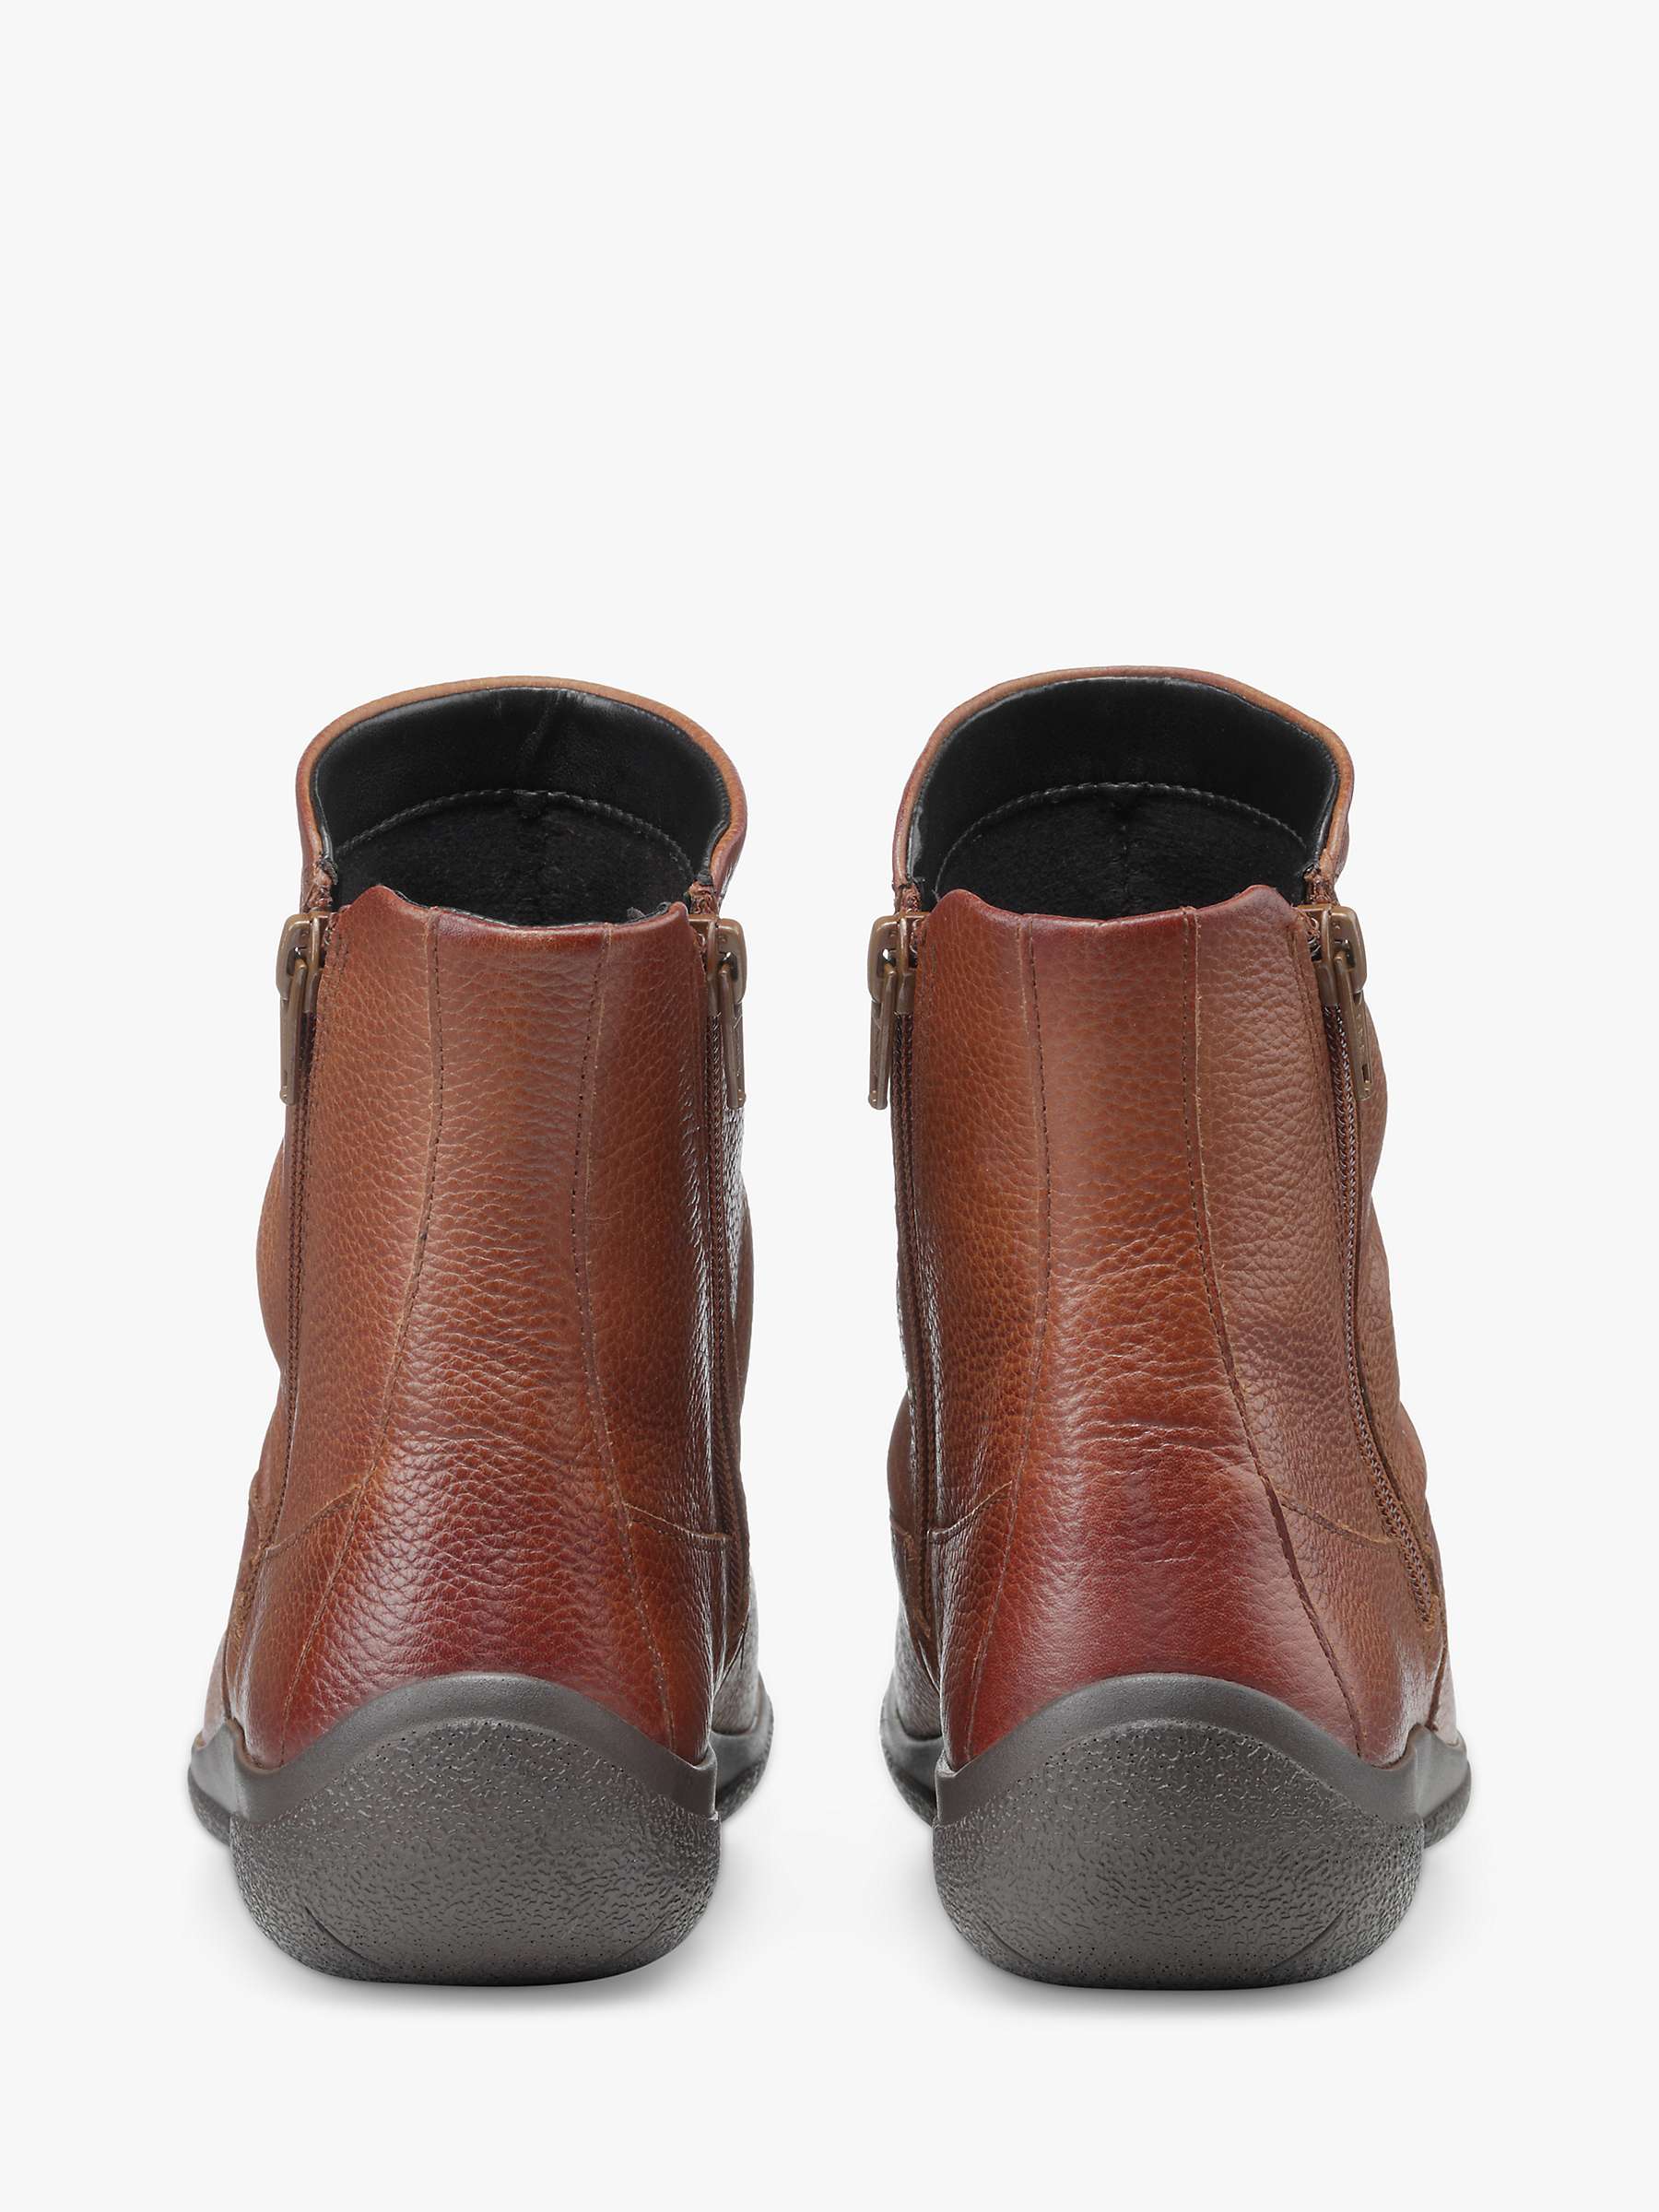 Buy Hotter Whisper Wide Fit Slouch Ankle Boots Online at johnlewis.com